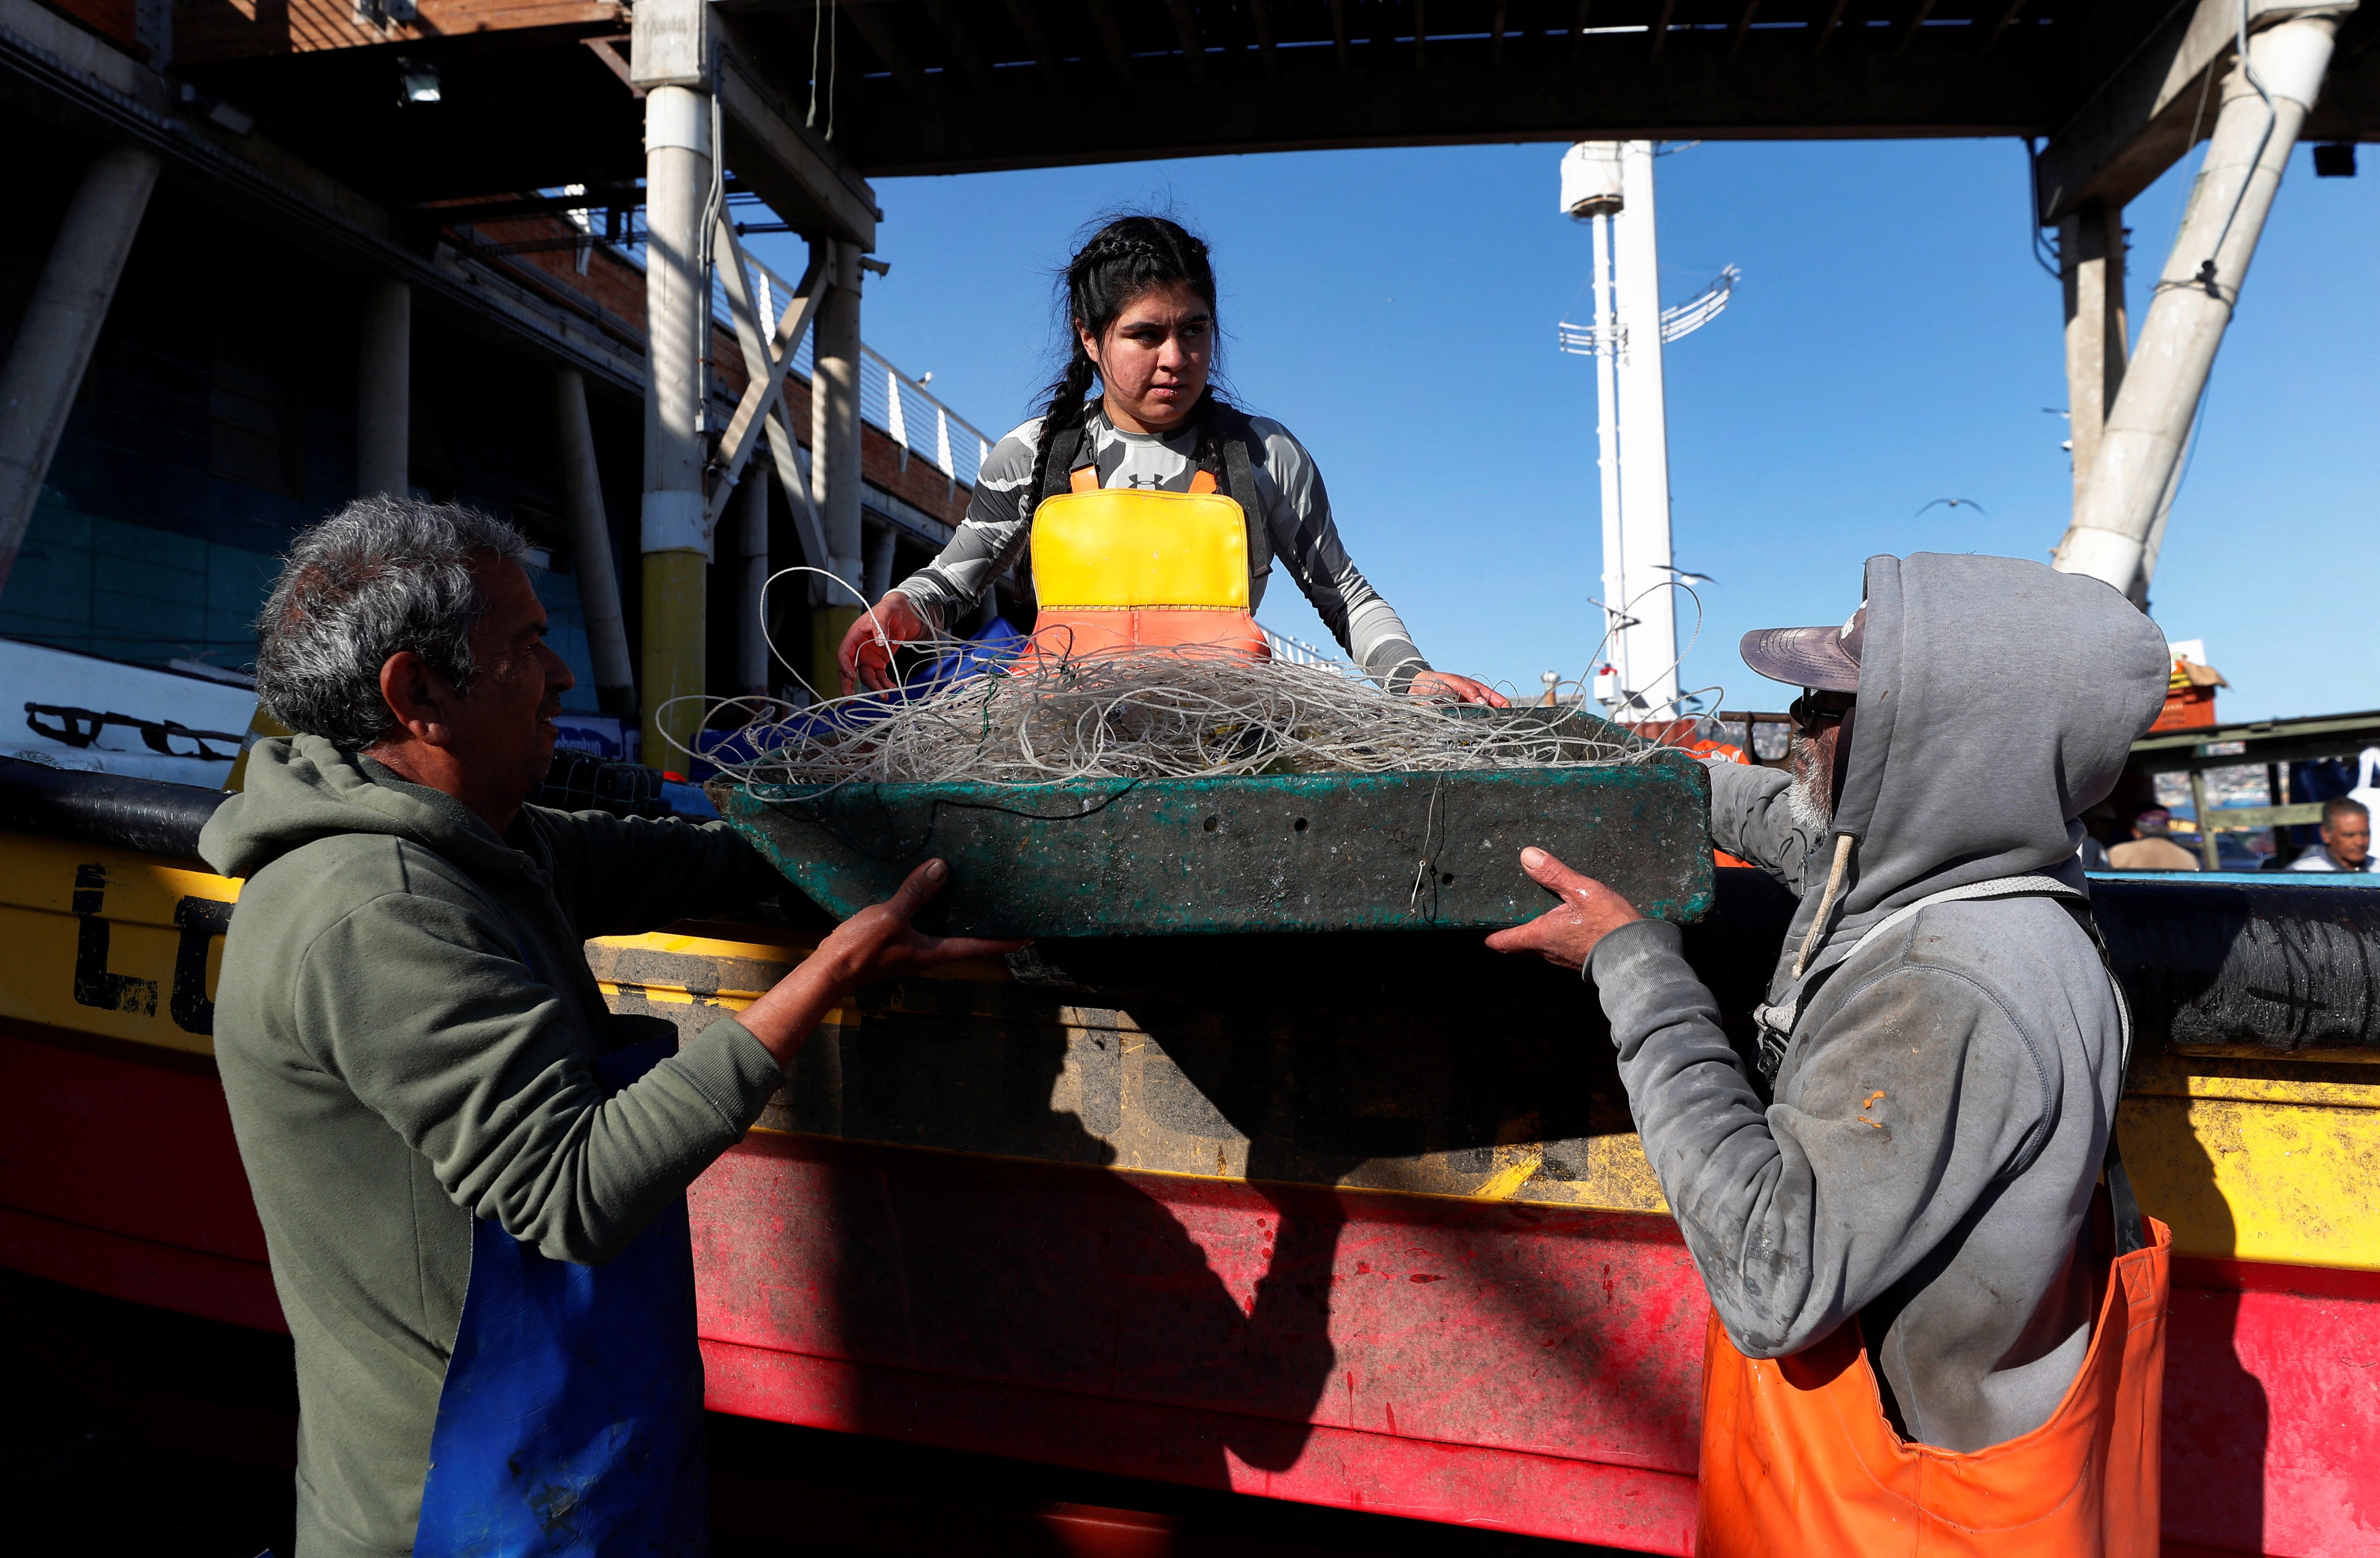 Artisanal fishers hold a box with an empty fishing net, after arriving at a fishermen's cove in Valparaiso